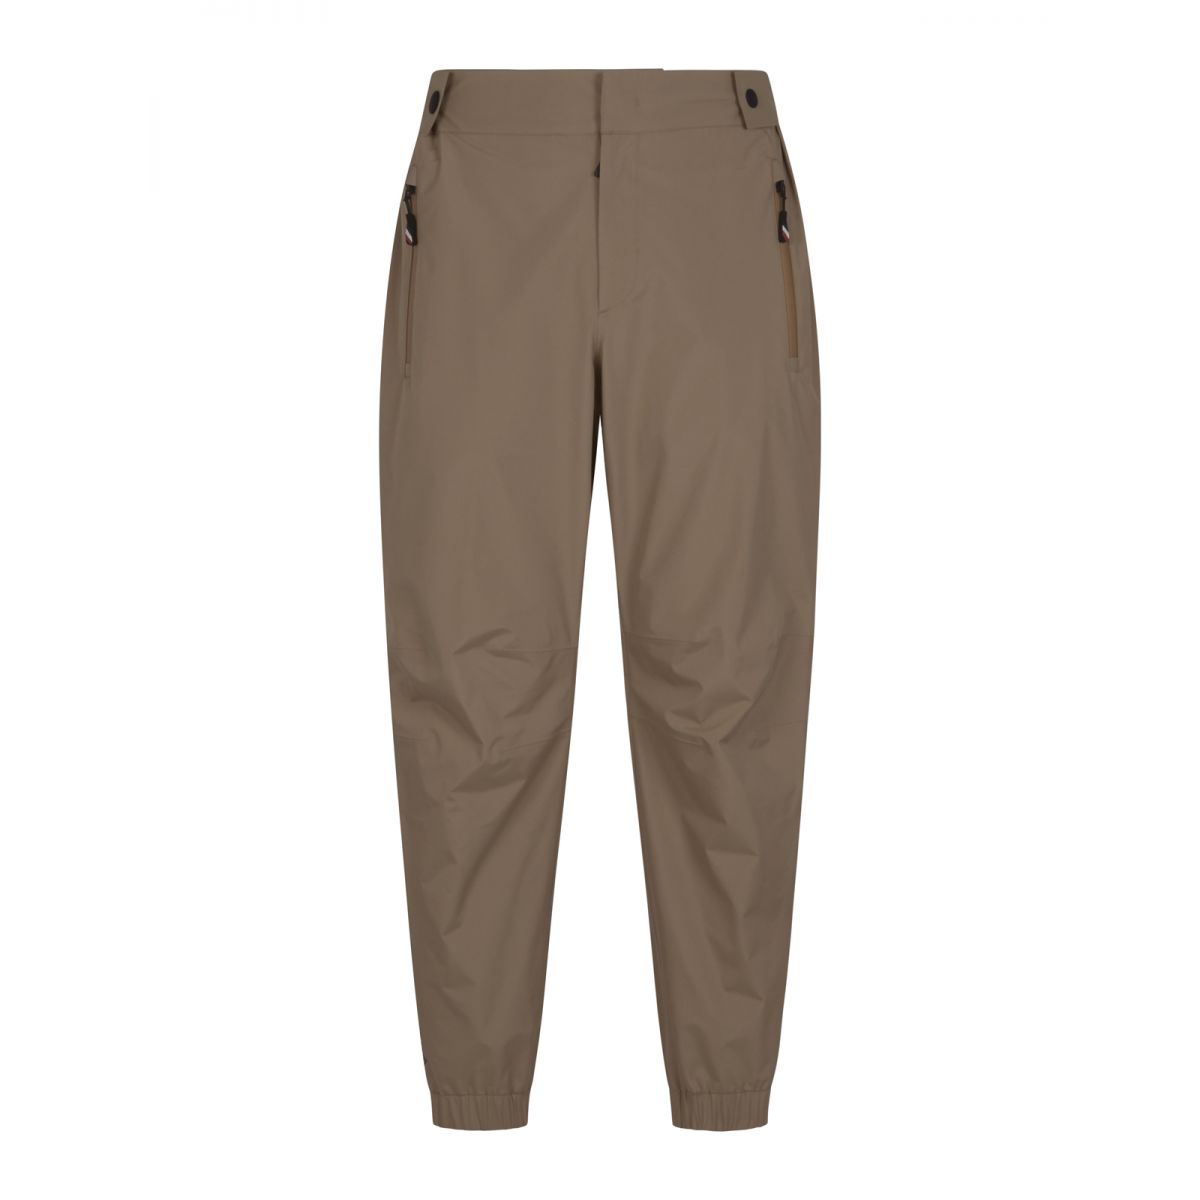 MONCLER GRENOBLE - GORE-TEX Paclite® trousers